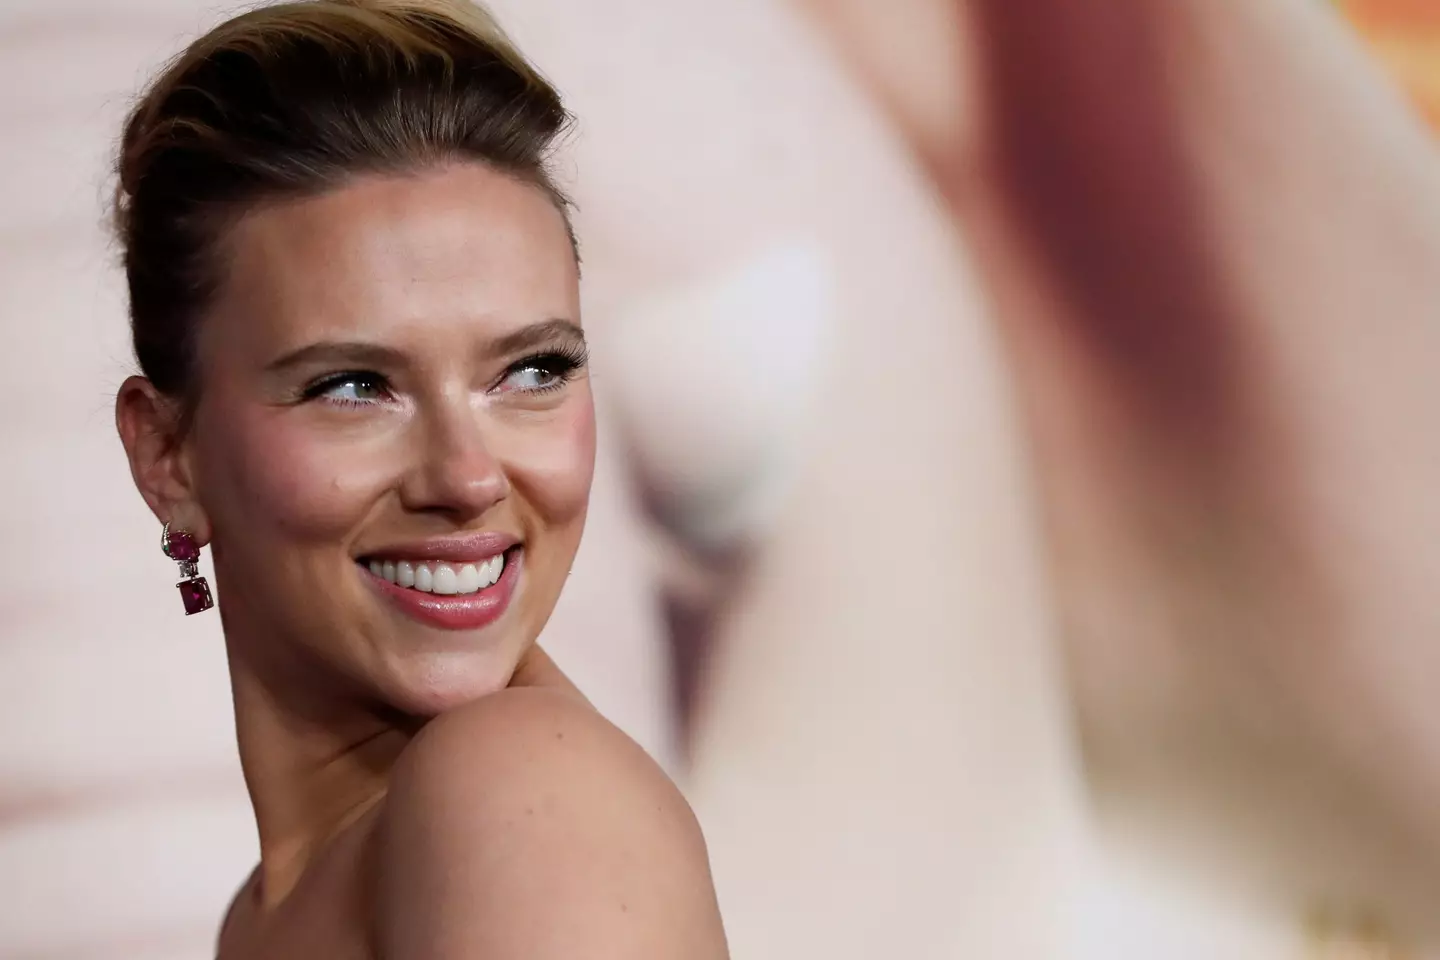 Scarlett Johansson has revealed many thought she was much older when she first began acting.